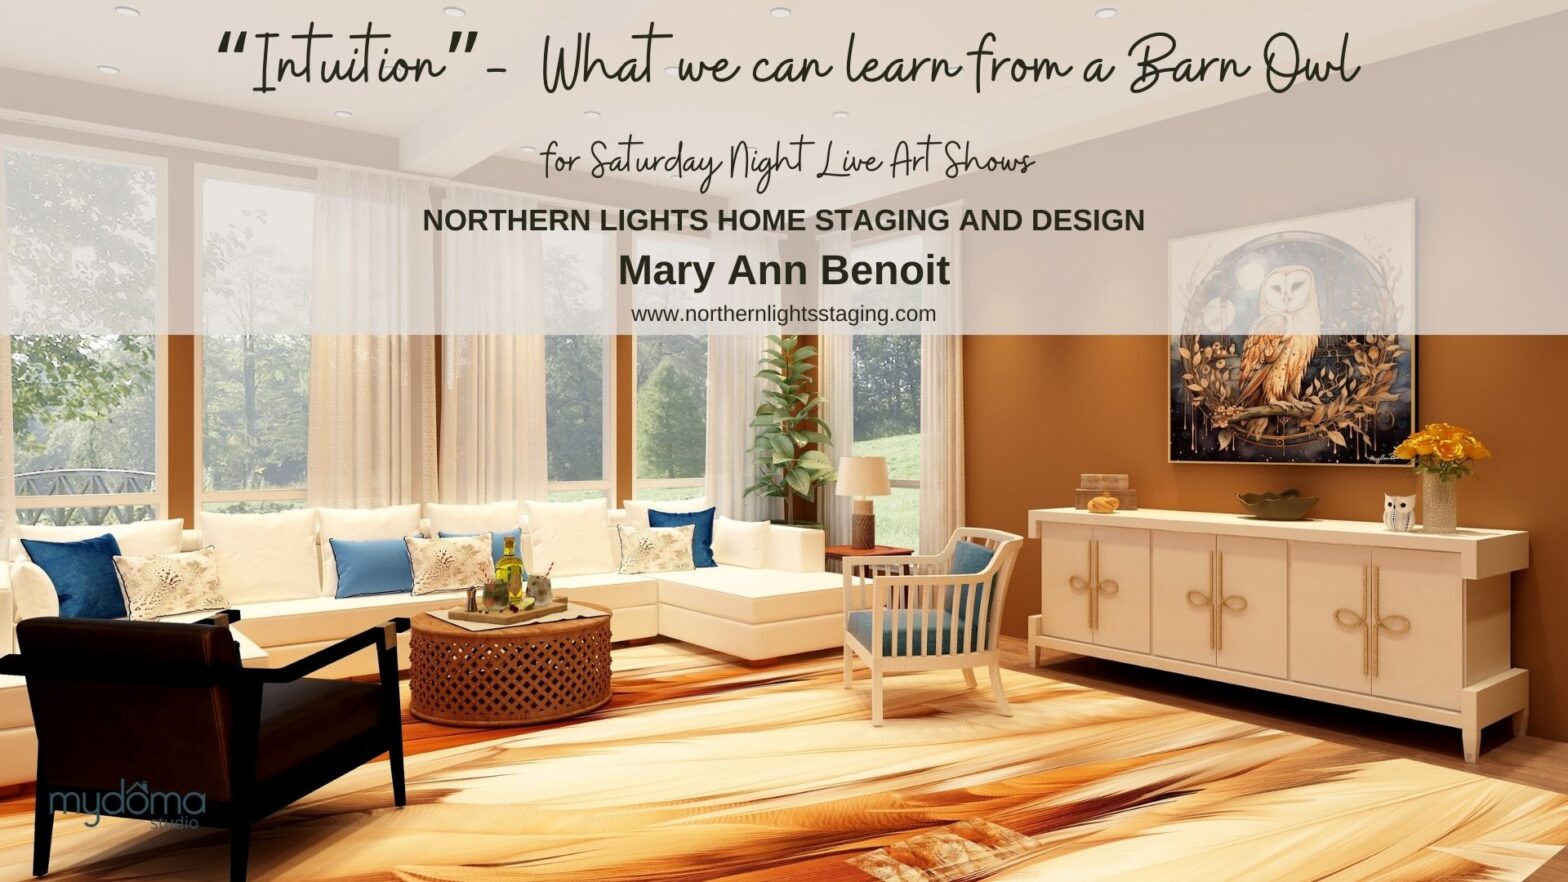 "Intuition" energy art and Interior Design by Mary Ann Benoit of Northern Lights Home Staging and Design.